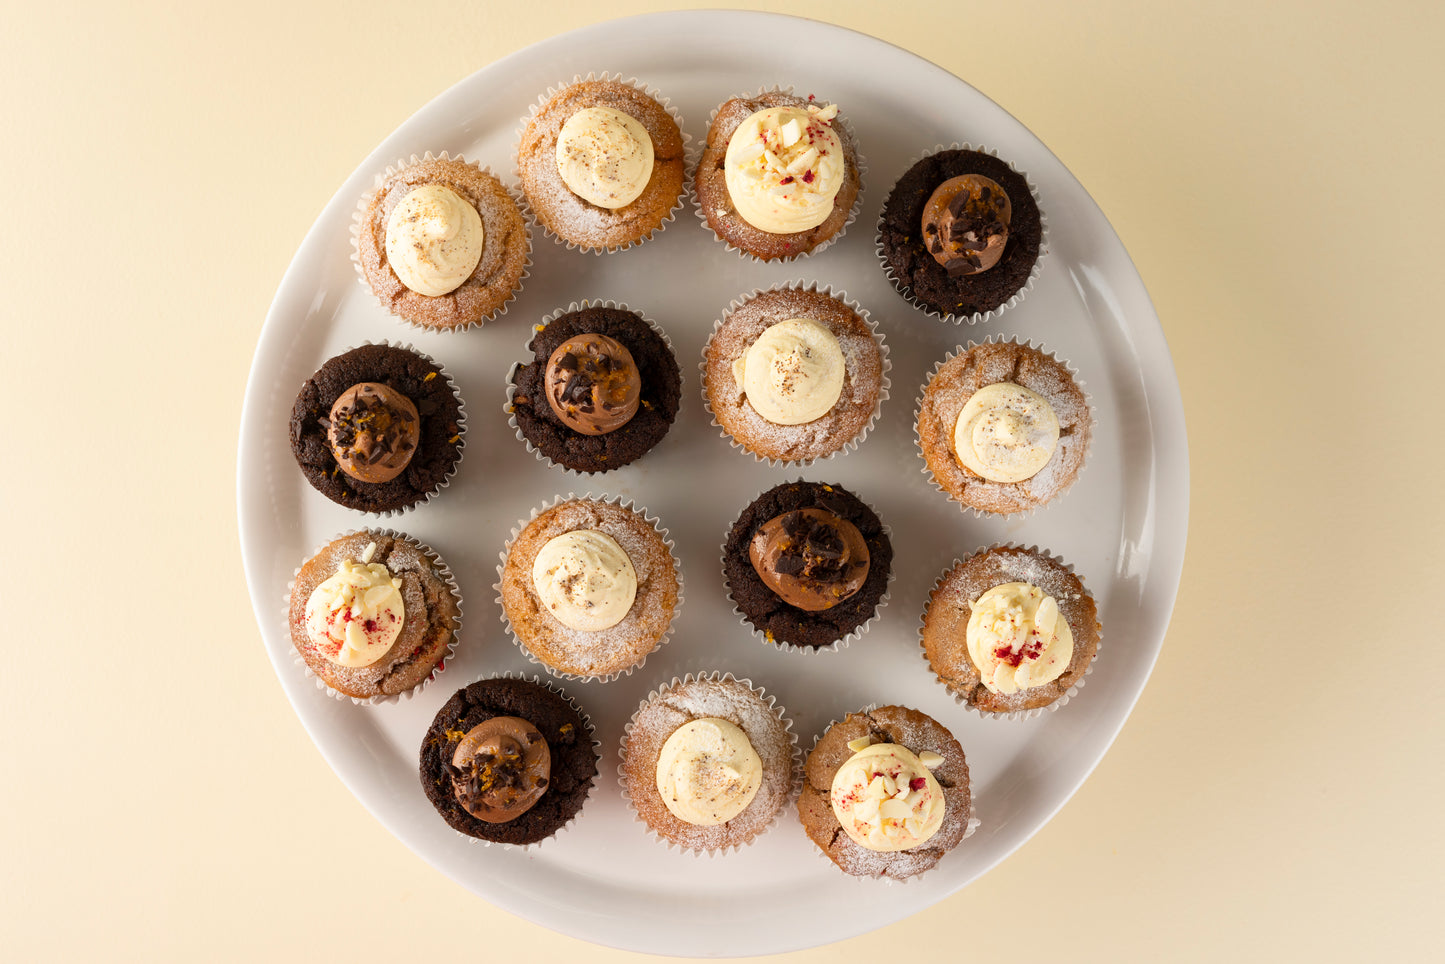 Meetings & Events Assortment - 12 Mixed Cupcakes